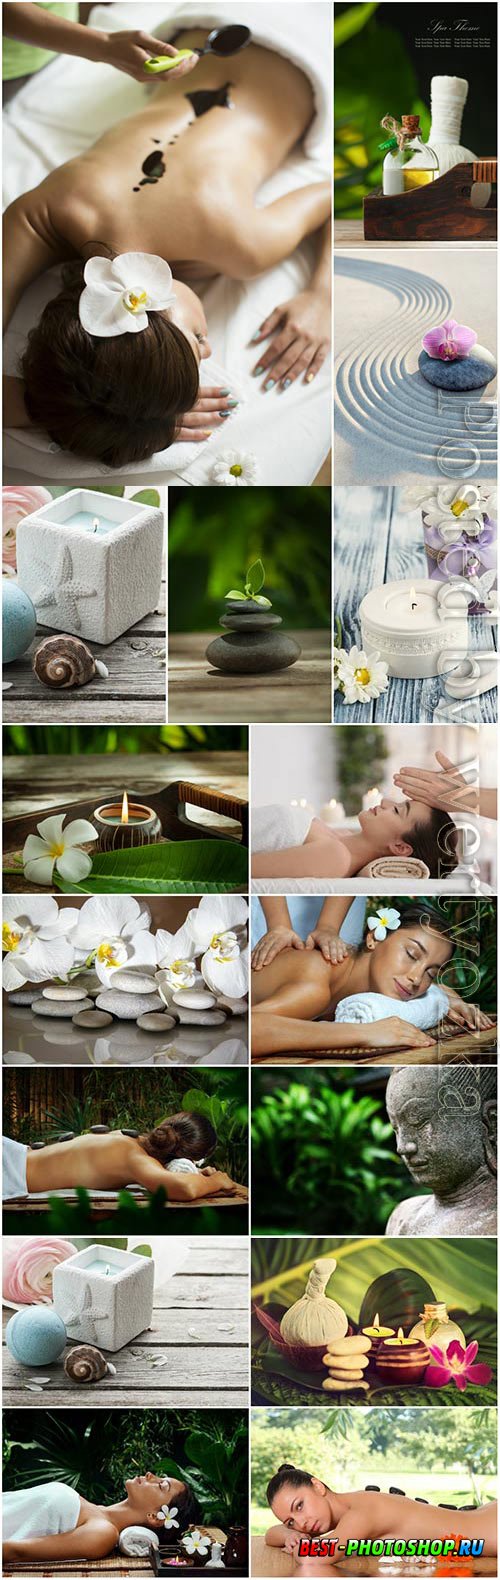 Health and relaxation concept, spa composition stock photo